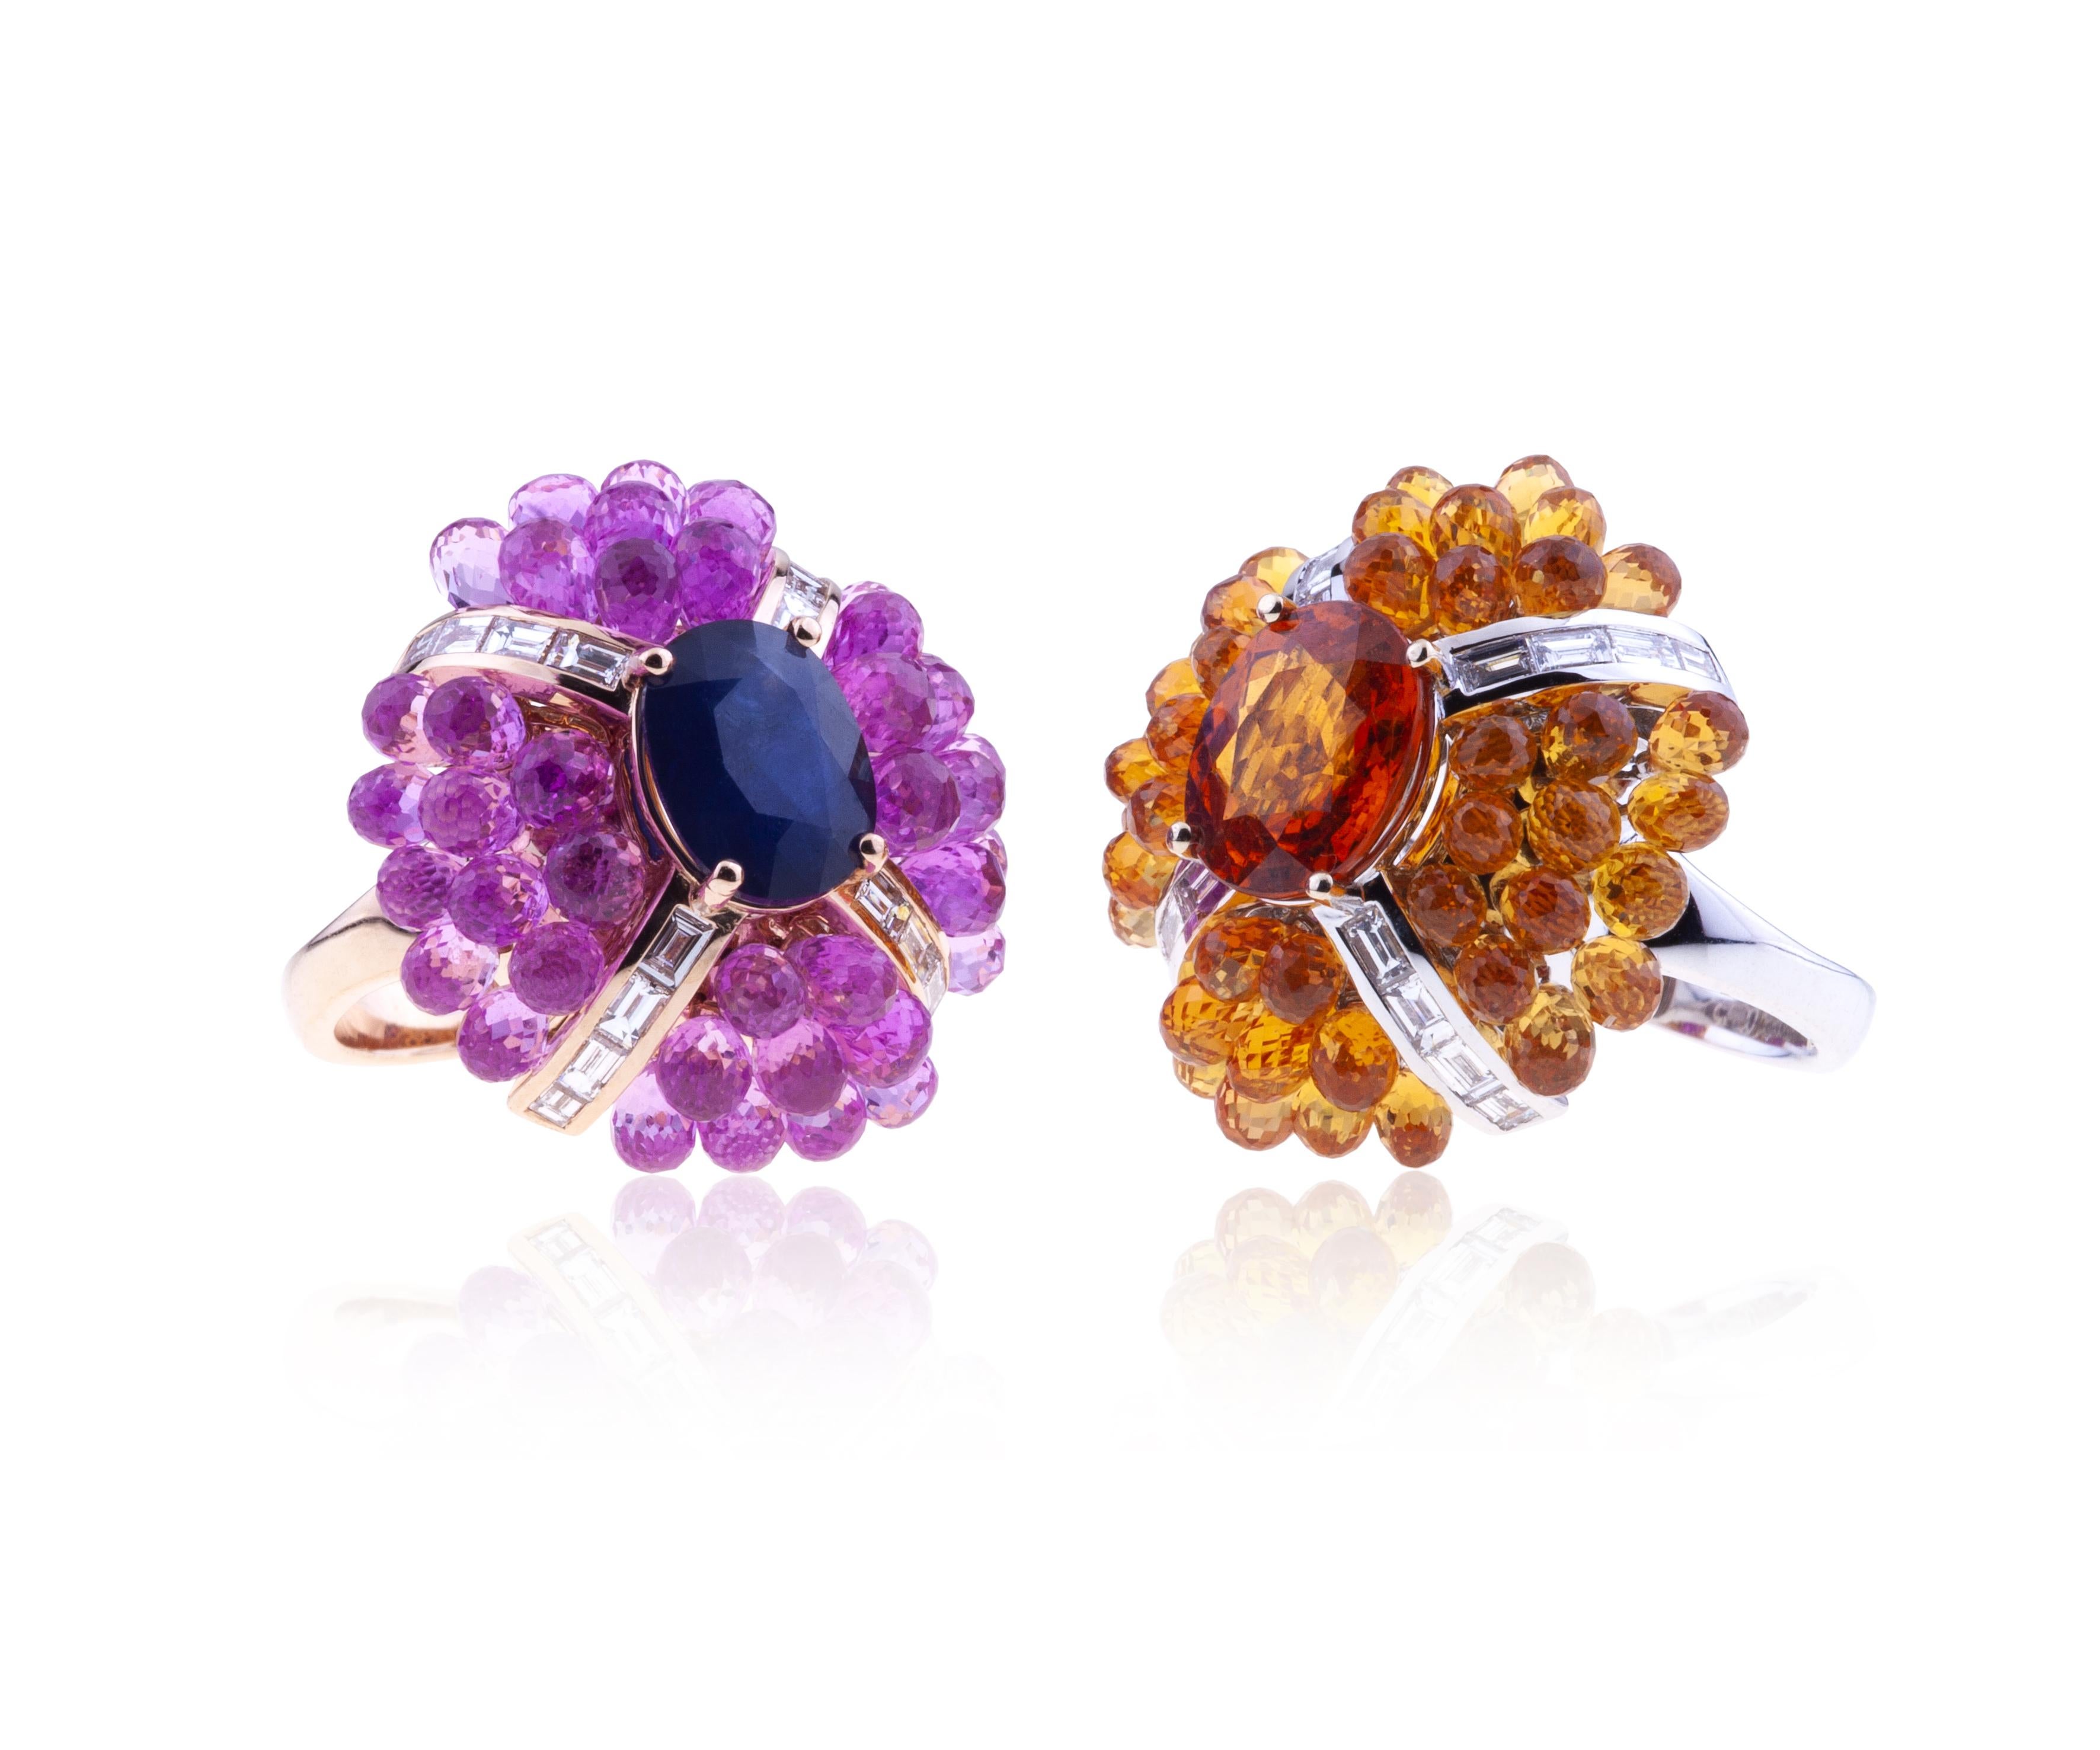 Big Flower Happy Ring 18kt Gold With a Oval Mandarin Granat, Pear Orange Sapphires and Baguette Diamonds.
This coloured ring transmit Happiness to ladies who will wear it, together with preciousness deriving from a cascade of natural orange